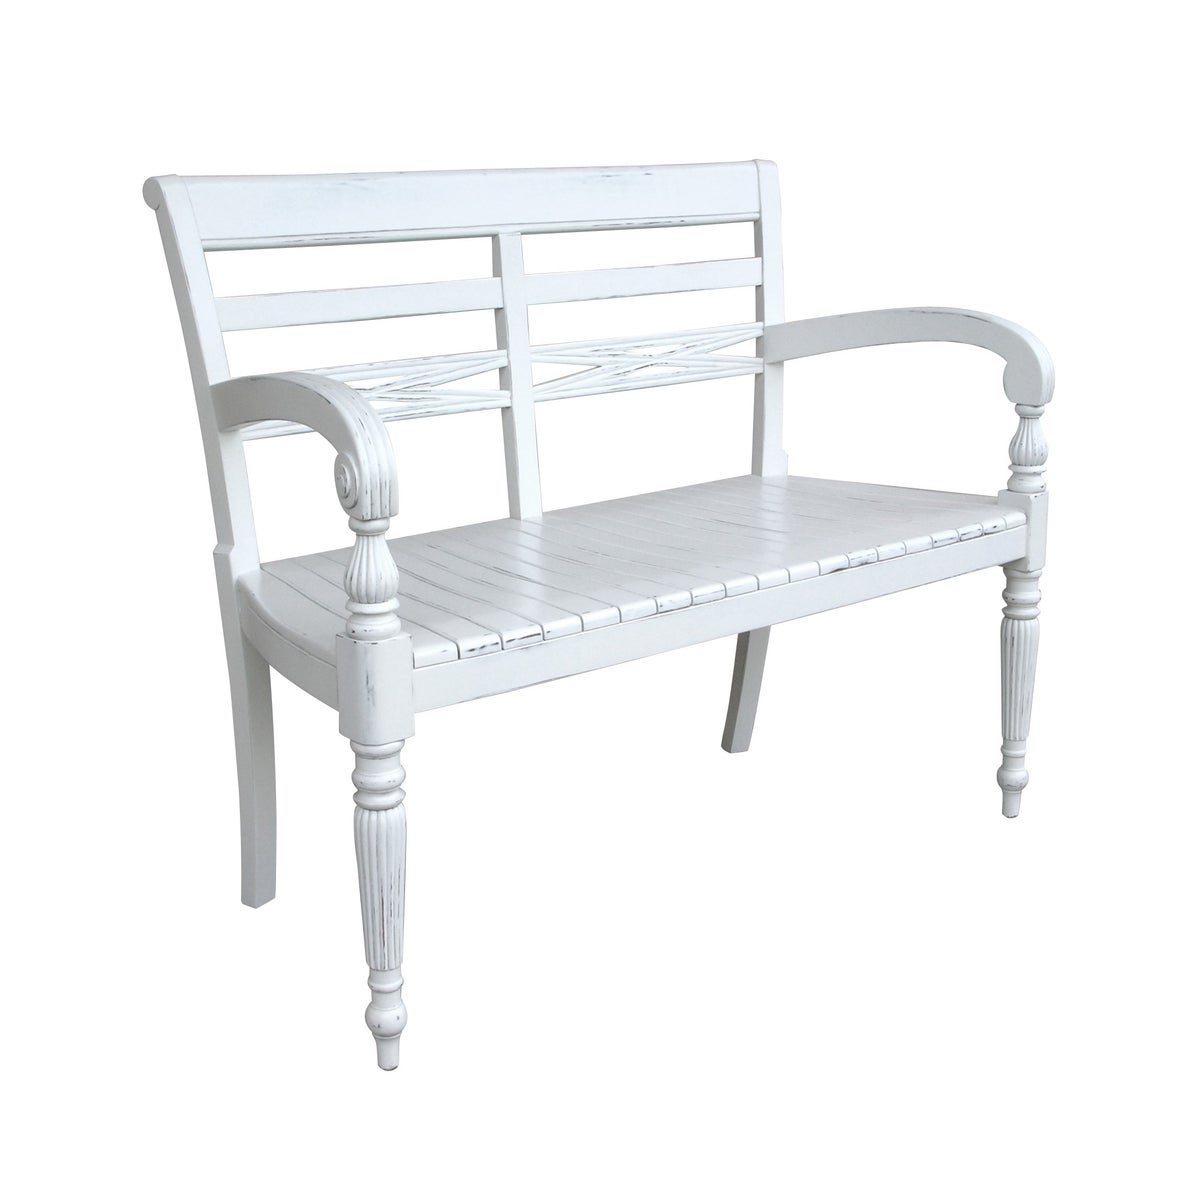 RAFFLES BENCH - WHT - accents & accessories | TRADEWINDS Furniture